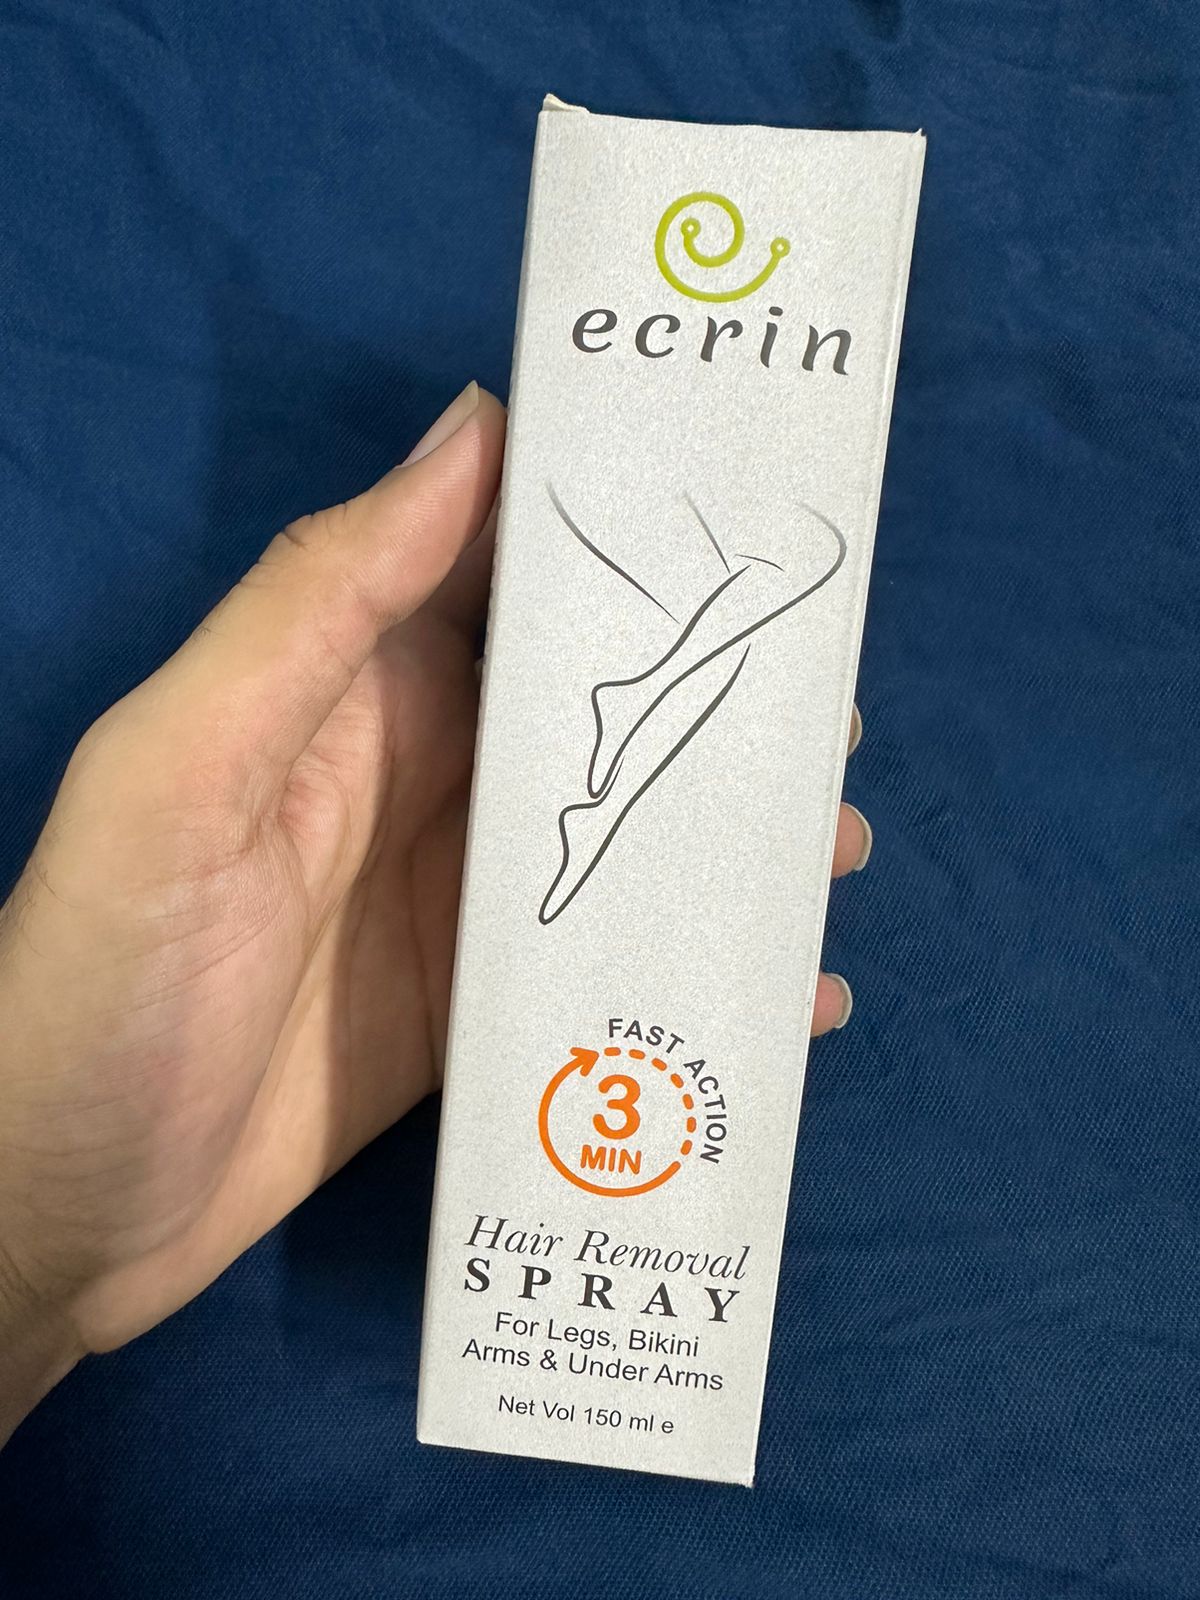 Ecrin Hair Removal Spray Silky Solutions for Effortless Beauty